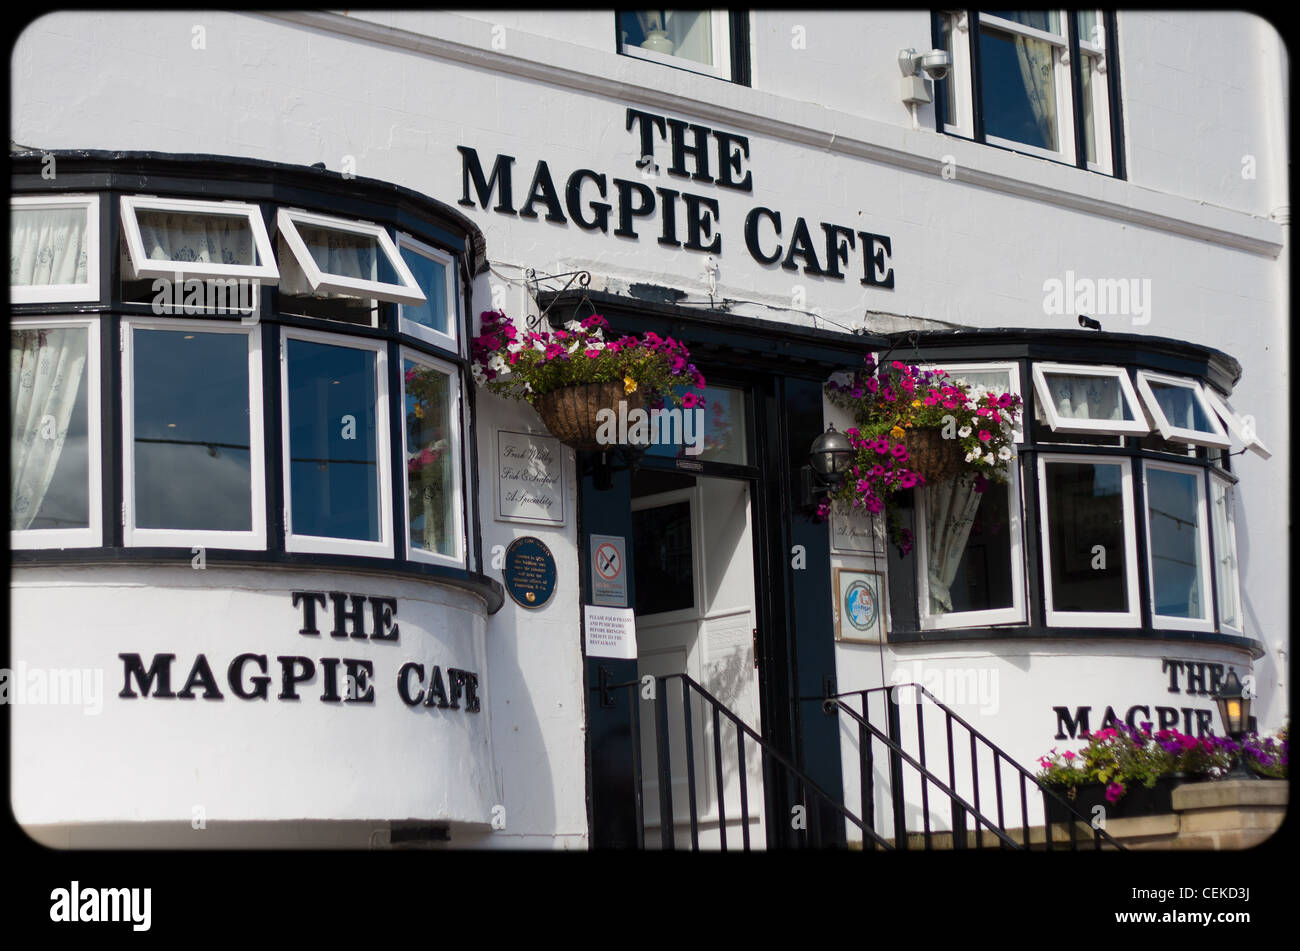 The Magpie Cafe in Whitby a well known cafe restaurant by the famous chef Jamie Oliver. Stock Photo